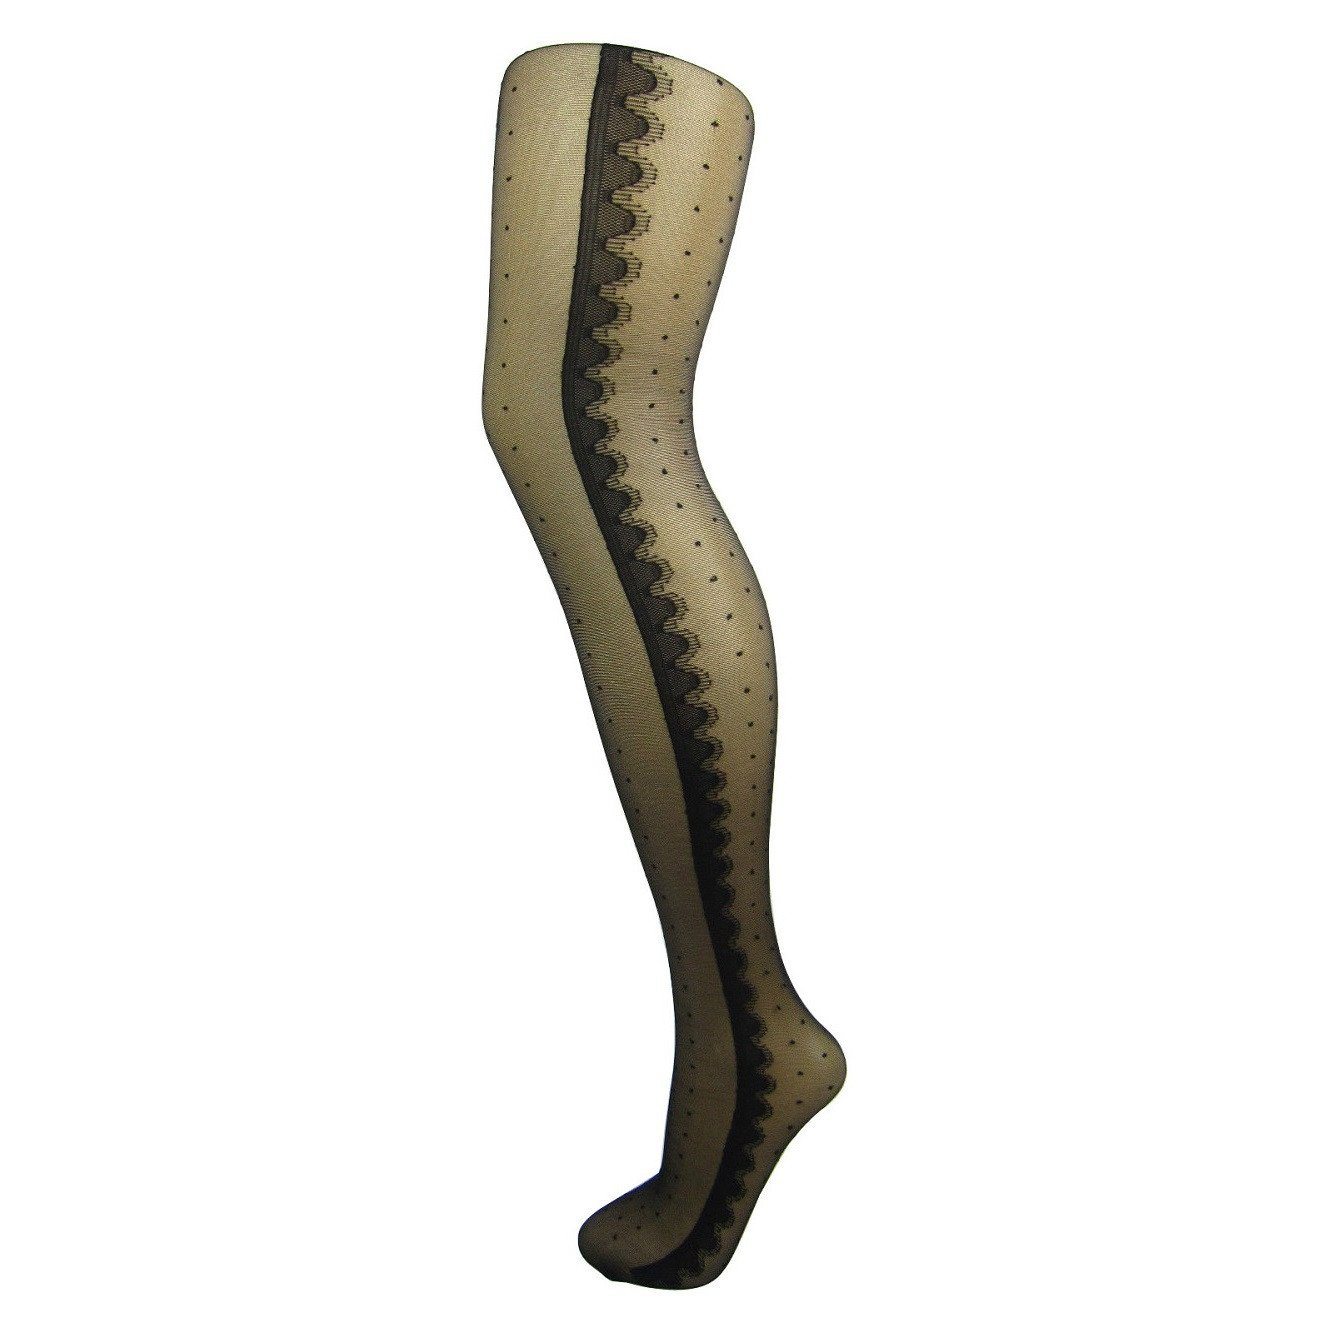 Sheer Dots Tights With Scalloped Side Seam - Leggsbeautiful